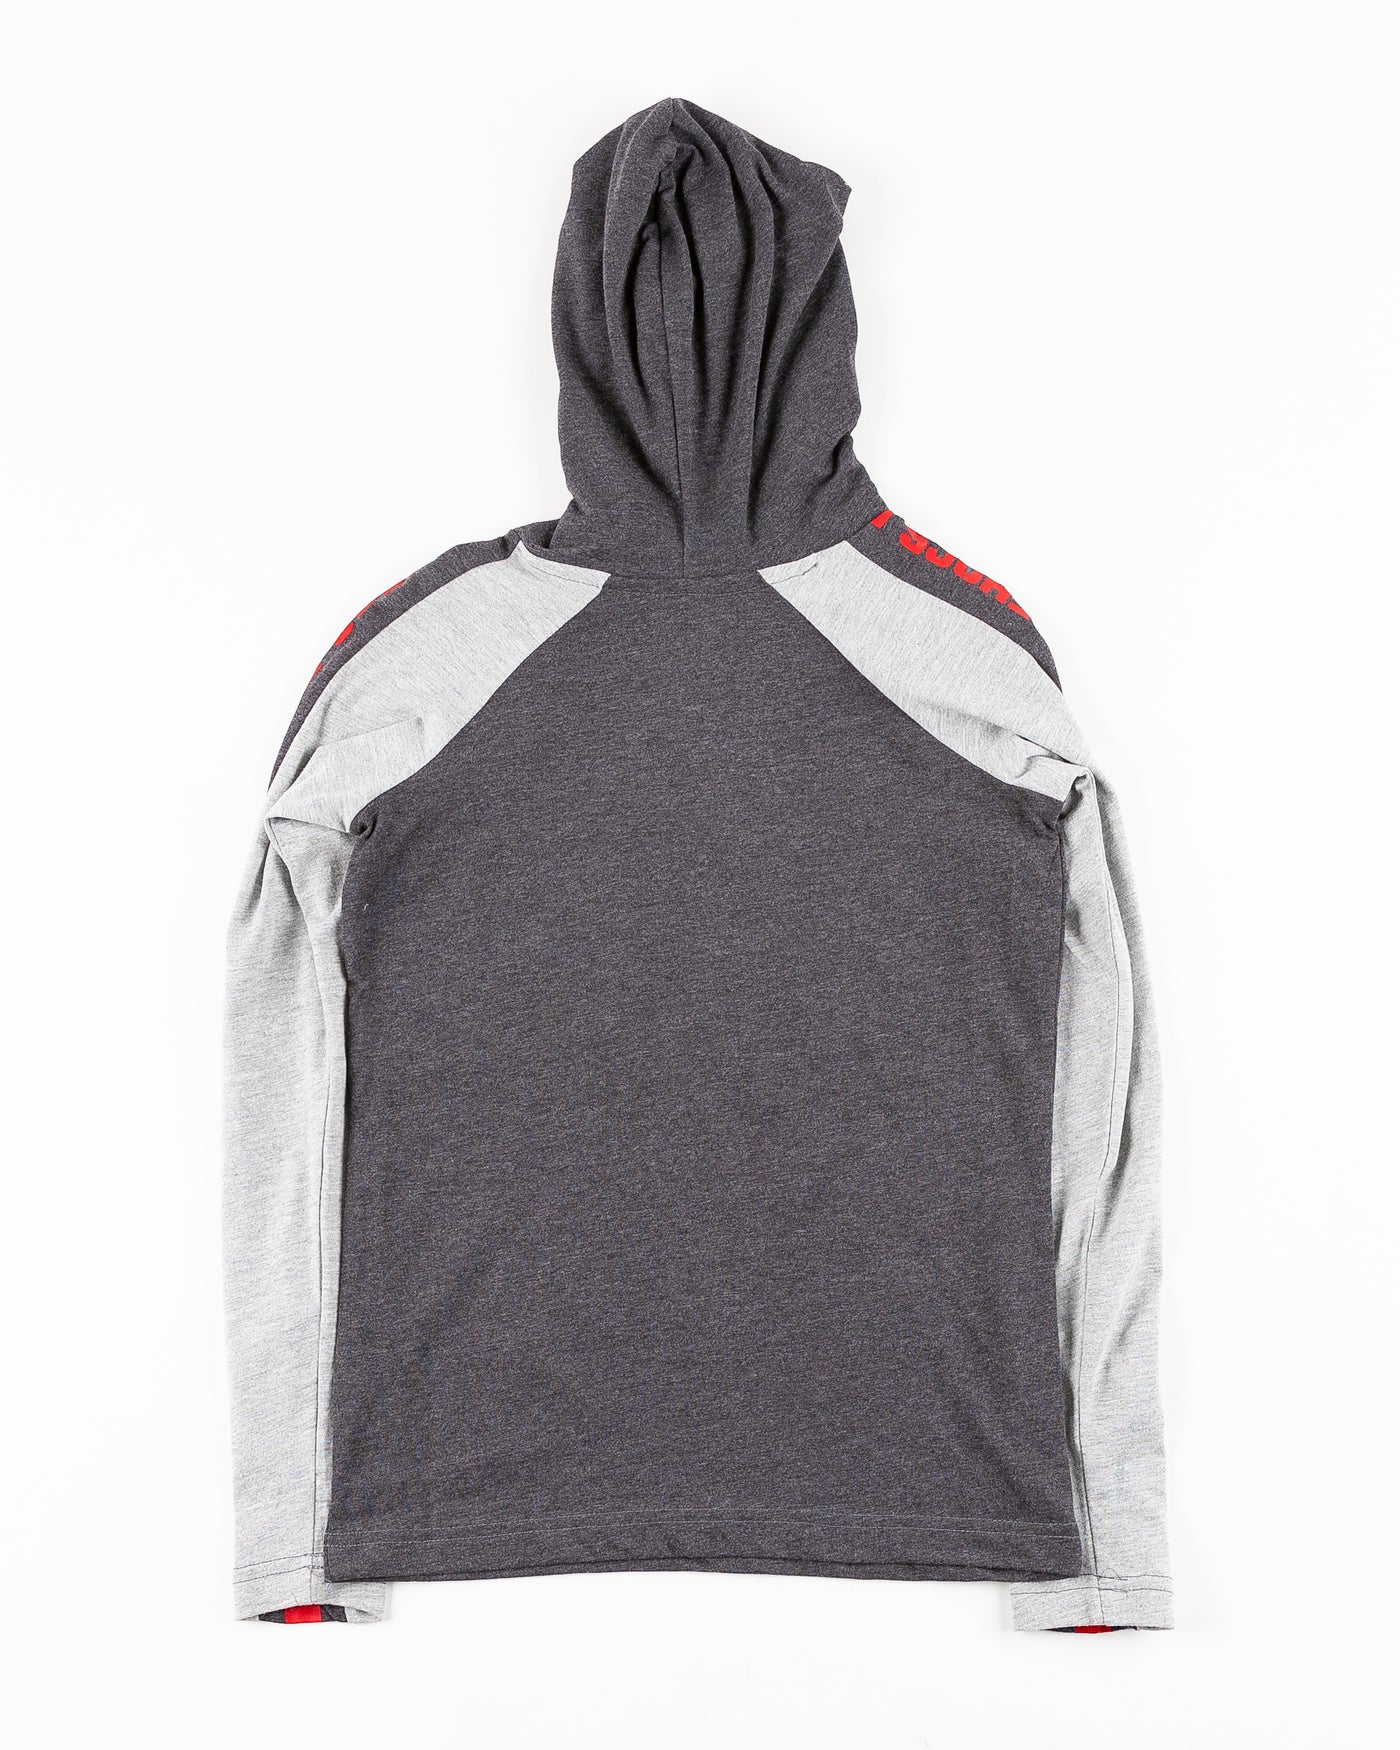 Colosseum two tone youth hoodie with Rockford IceHogs logo across front and wordmark on sleeves - back lay flat